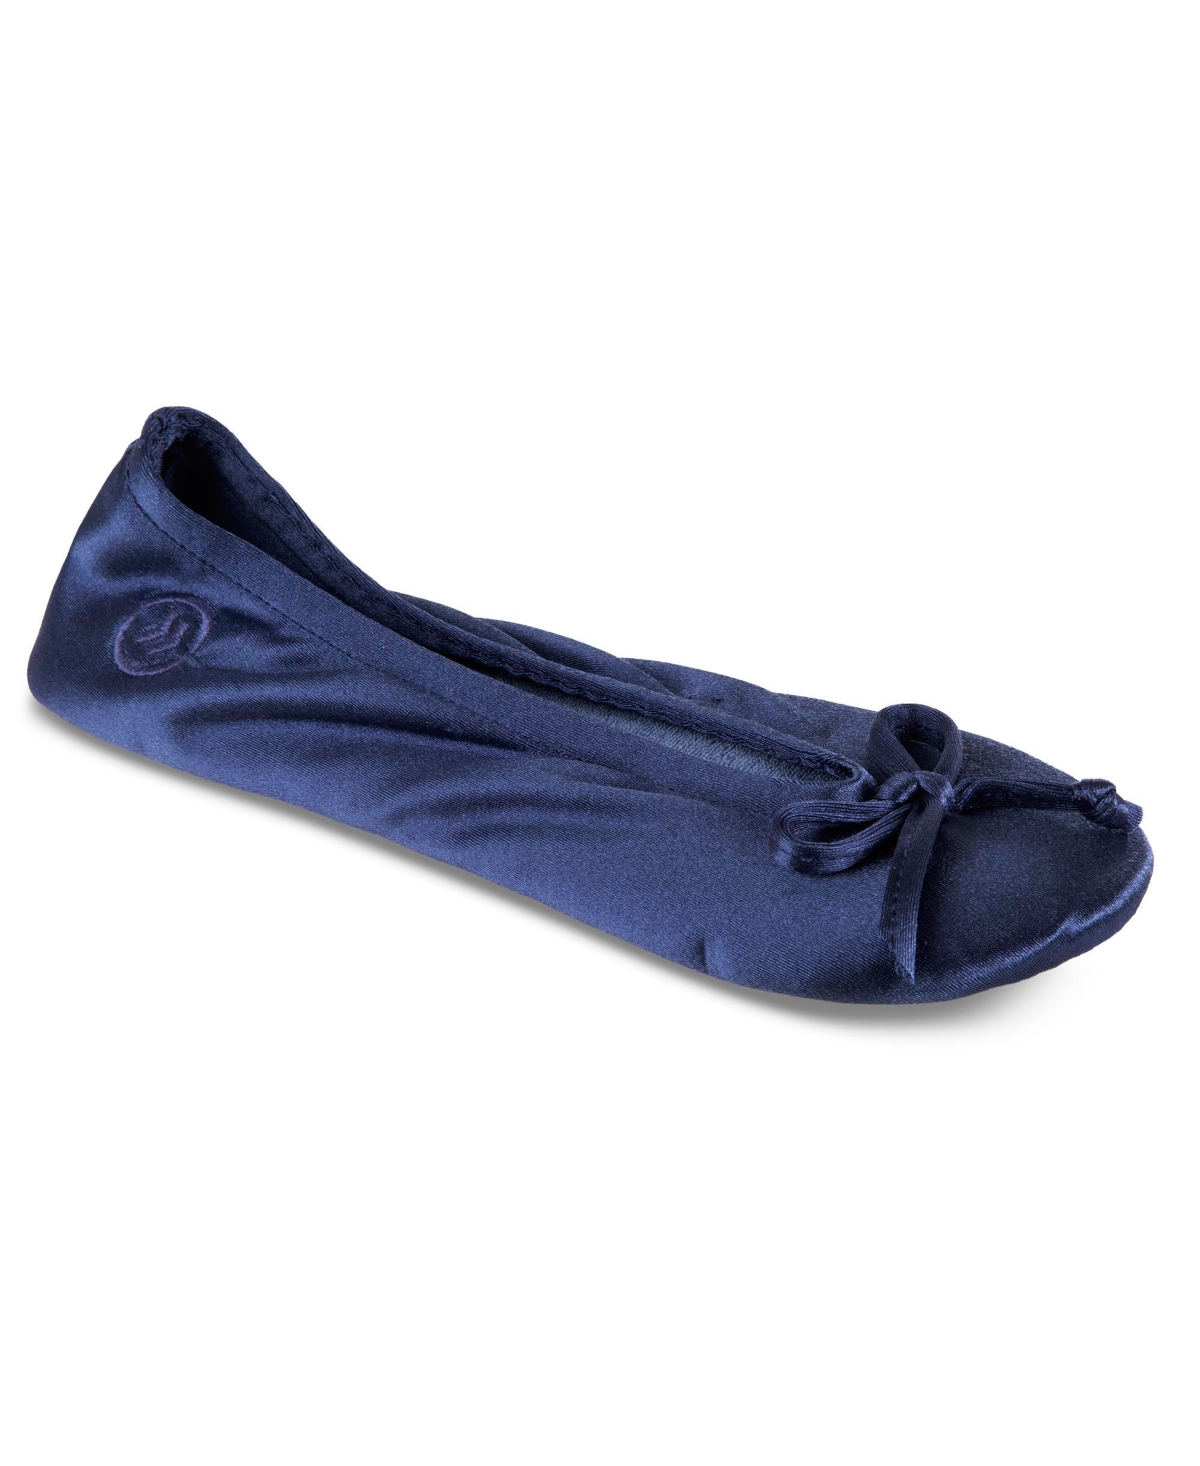 Isotoner Signature Women's Satin Ballerina Slippers With Bow In Navy Blue